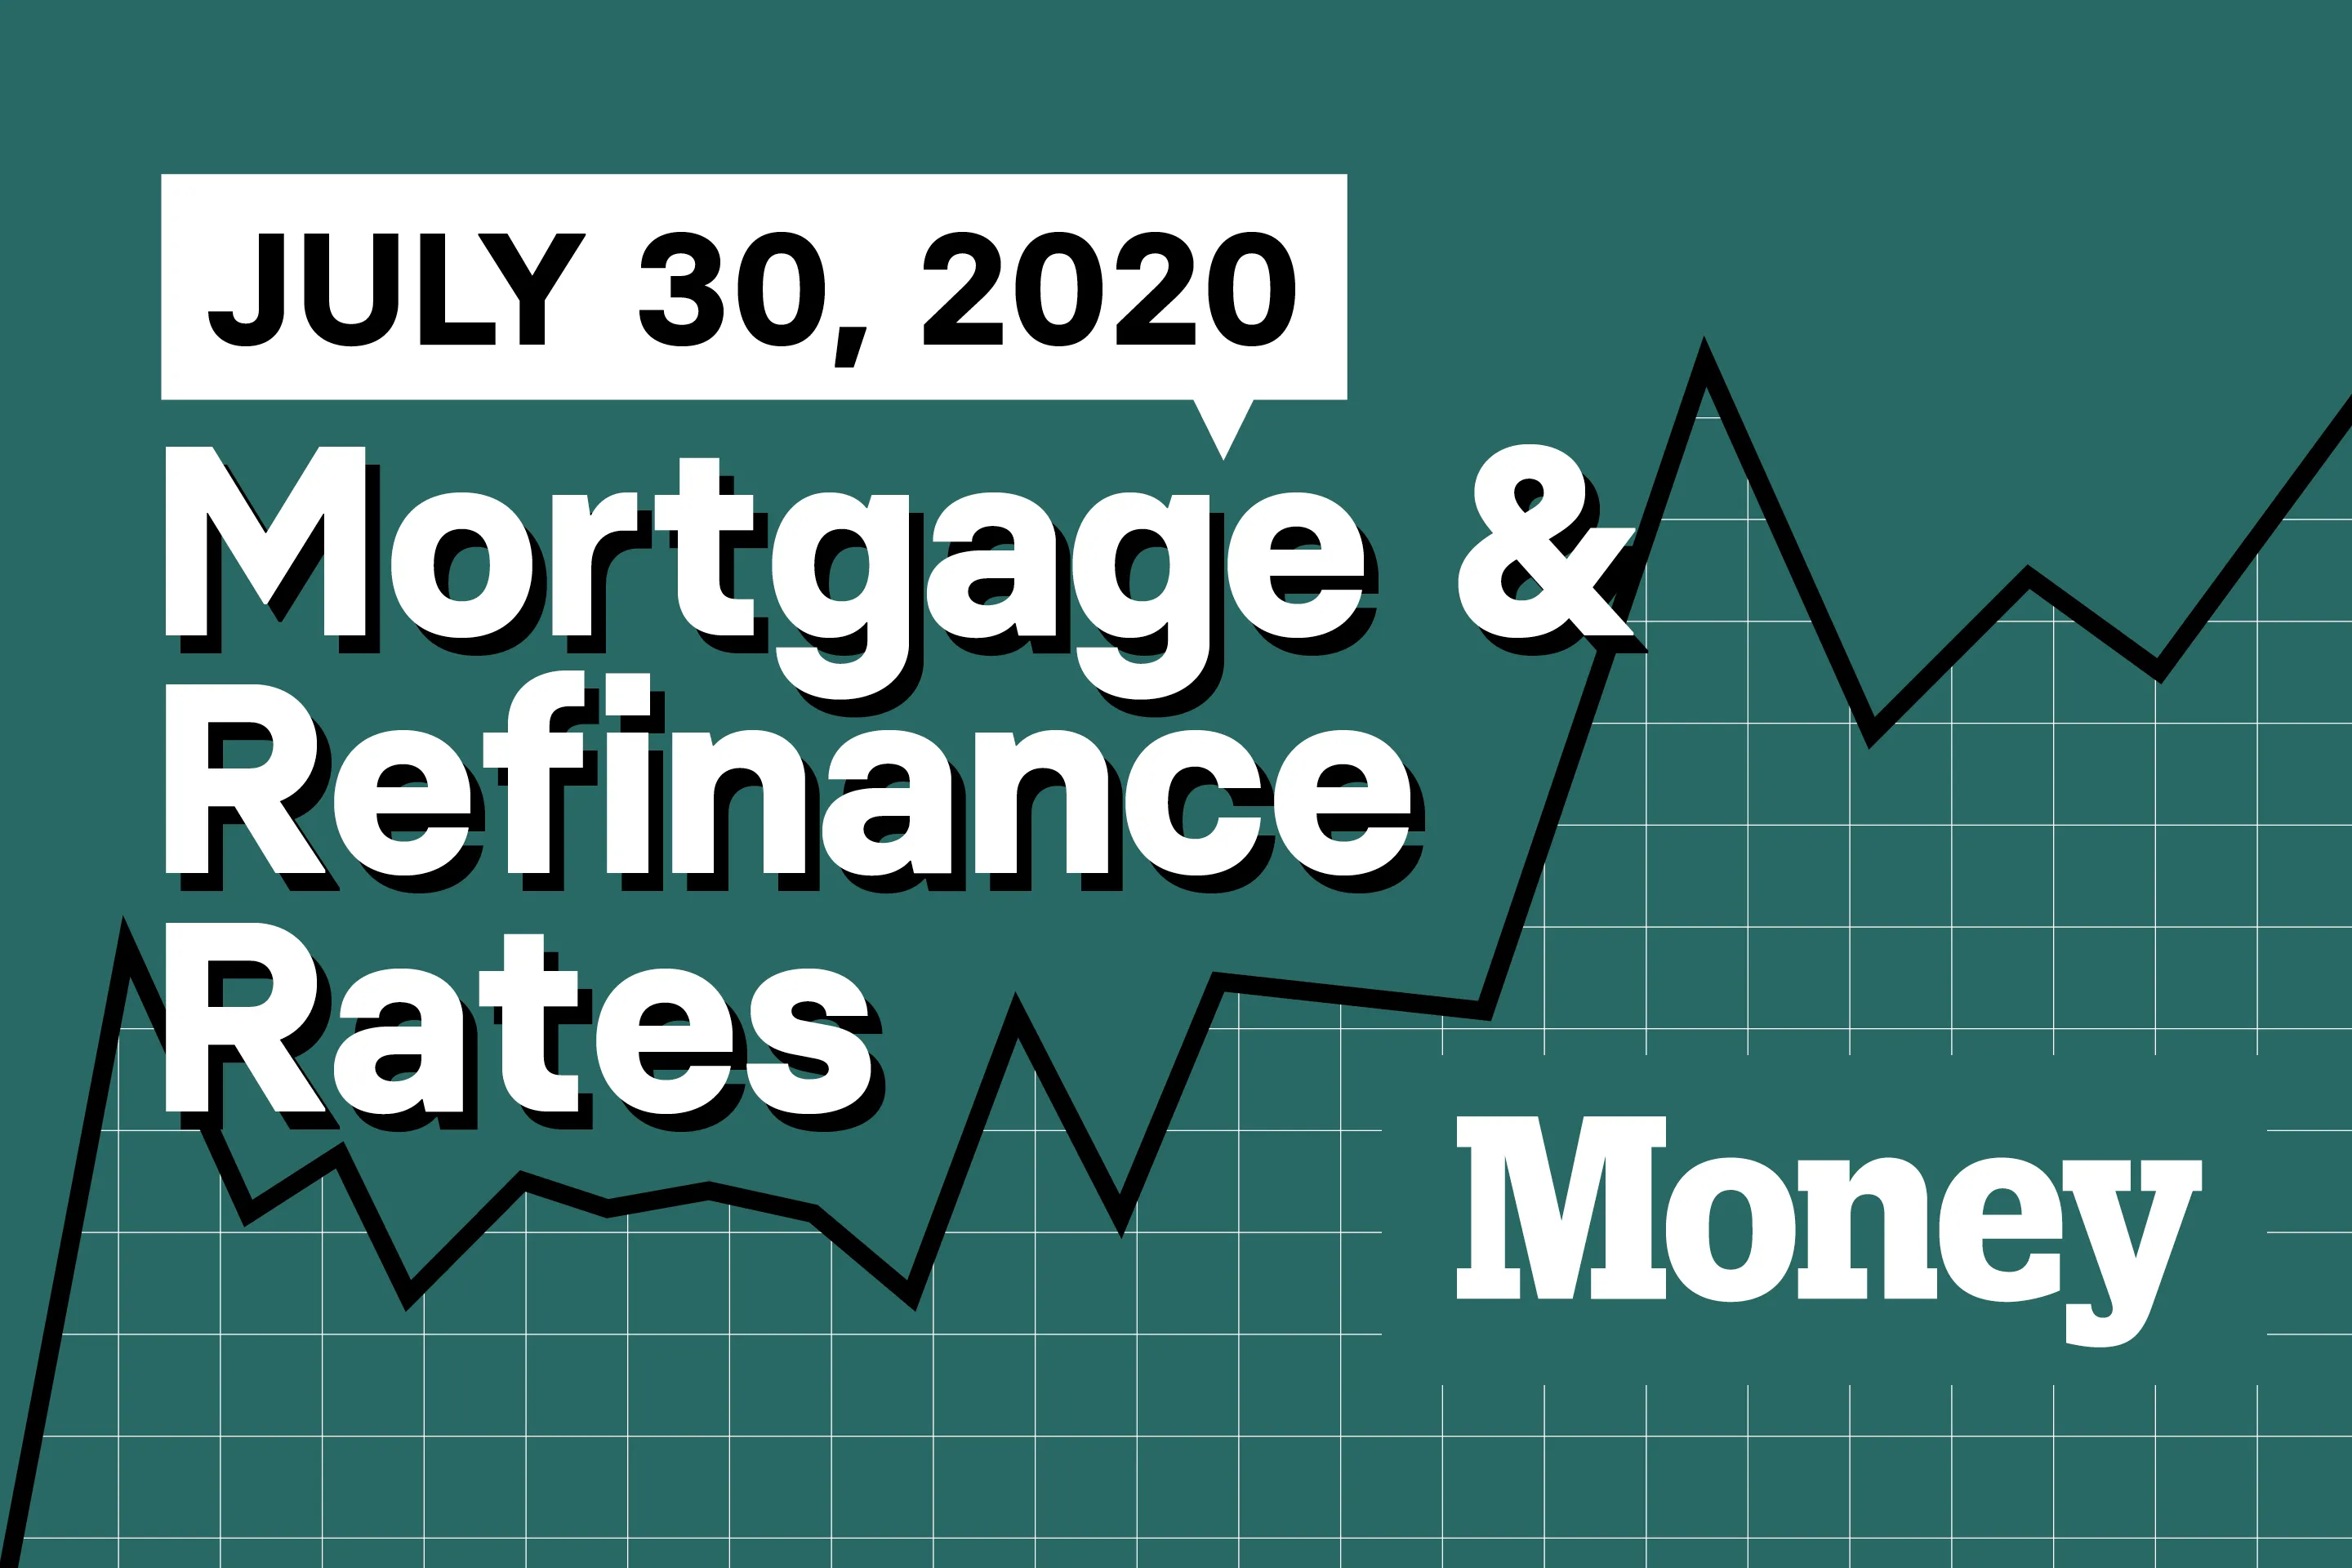 Here Are Today's Best Mortgage & Refinance Rates for July 30, 2020